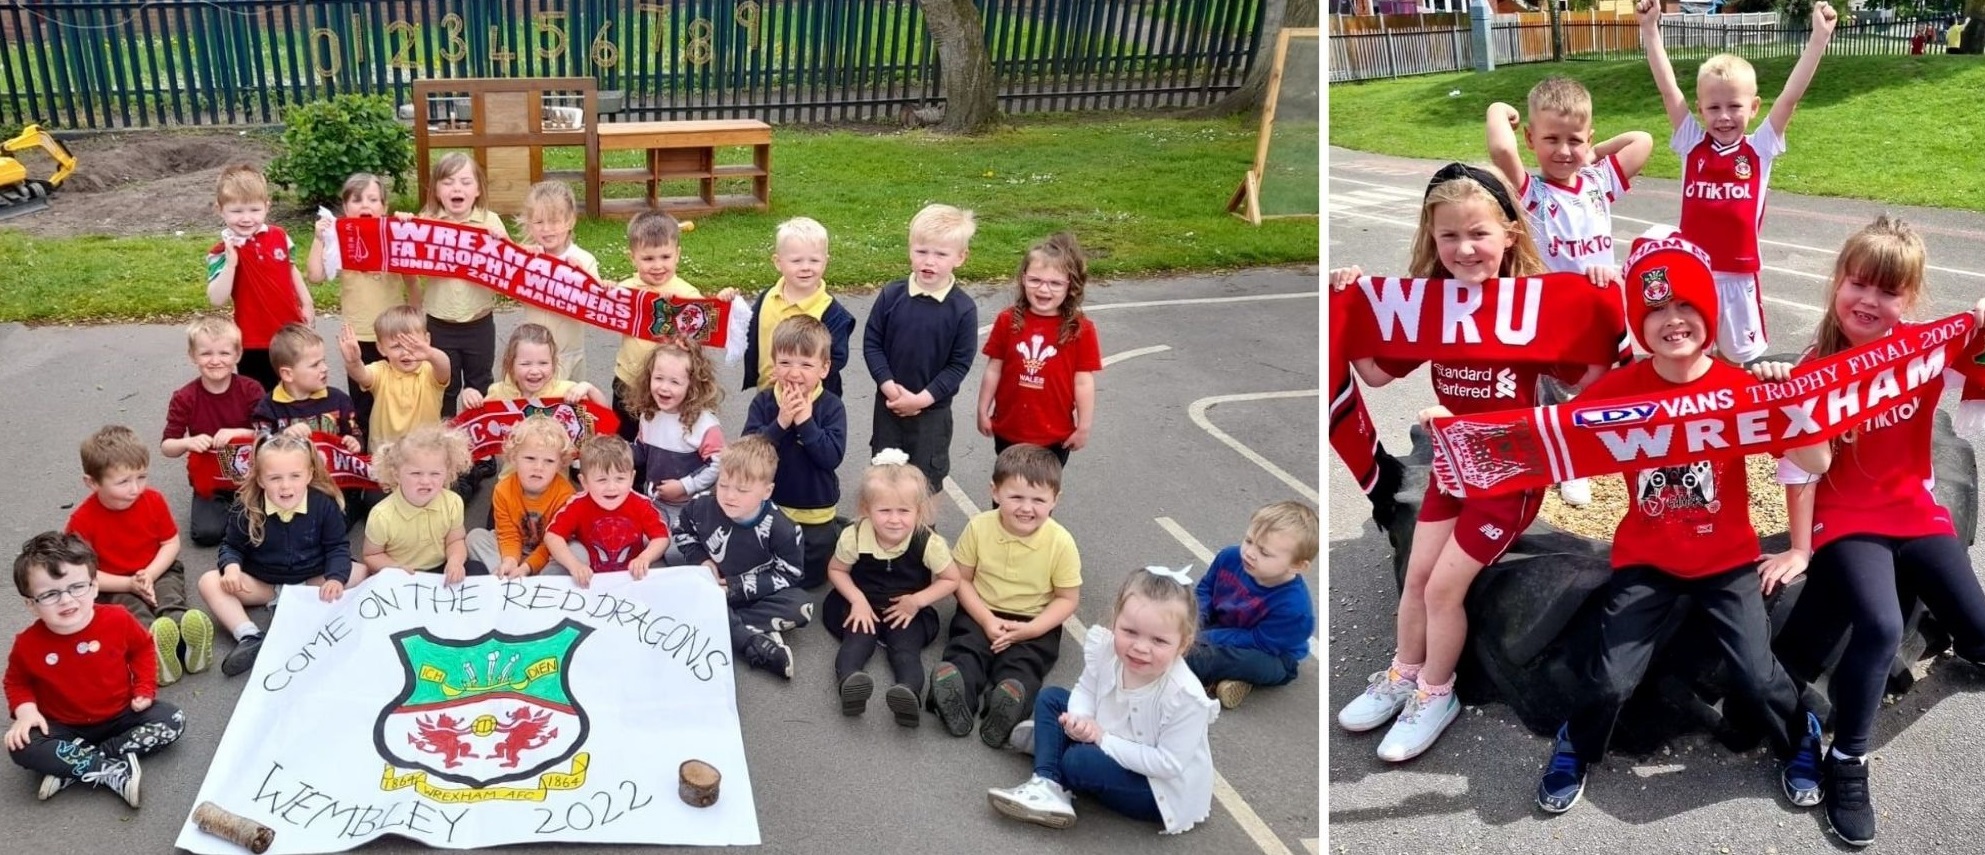 Pupils at Ysgol Heulfan have been cheering on Wrexham AFC.